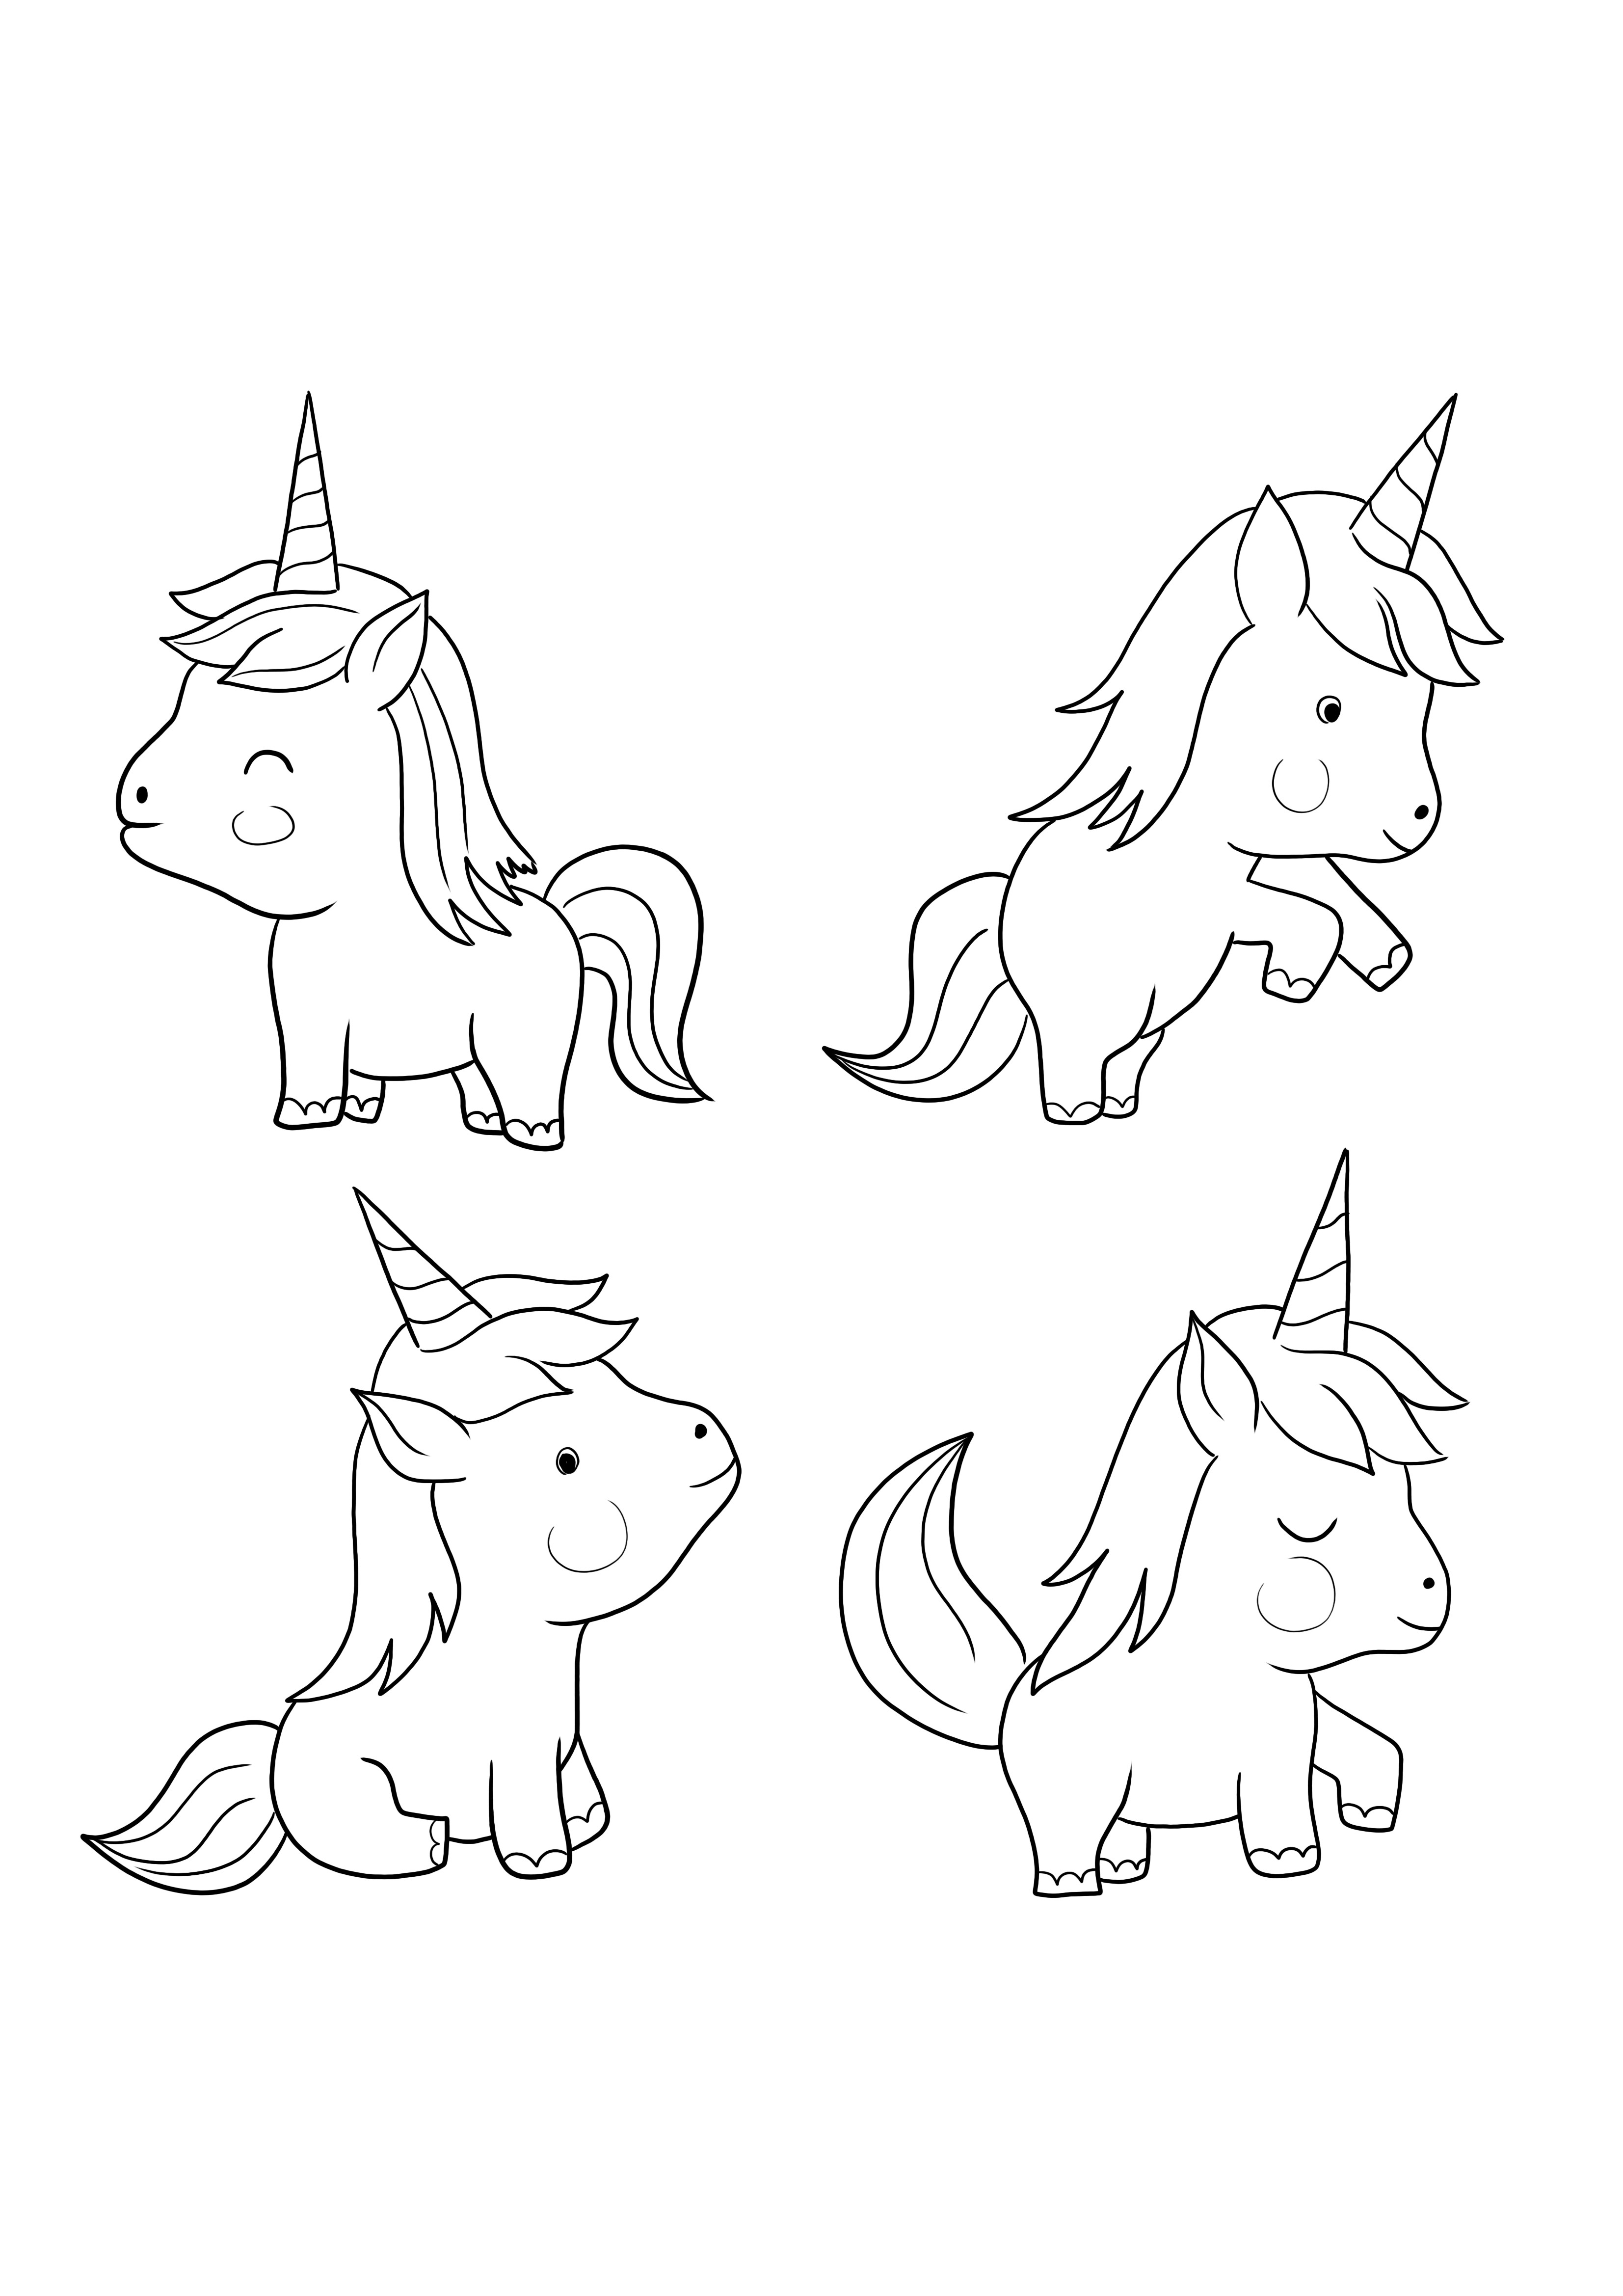 Coloring for free of unicorns to print or download